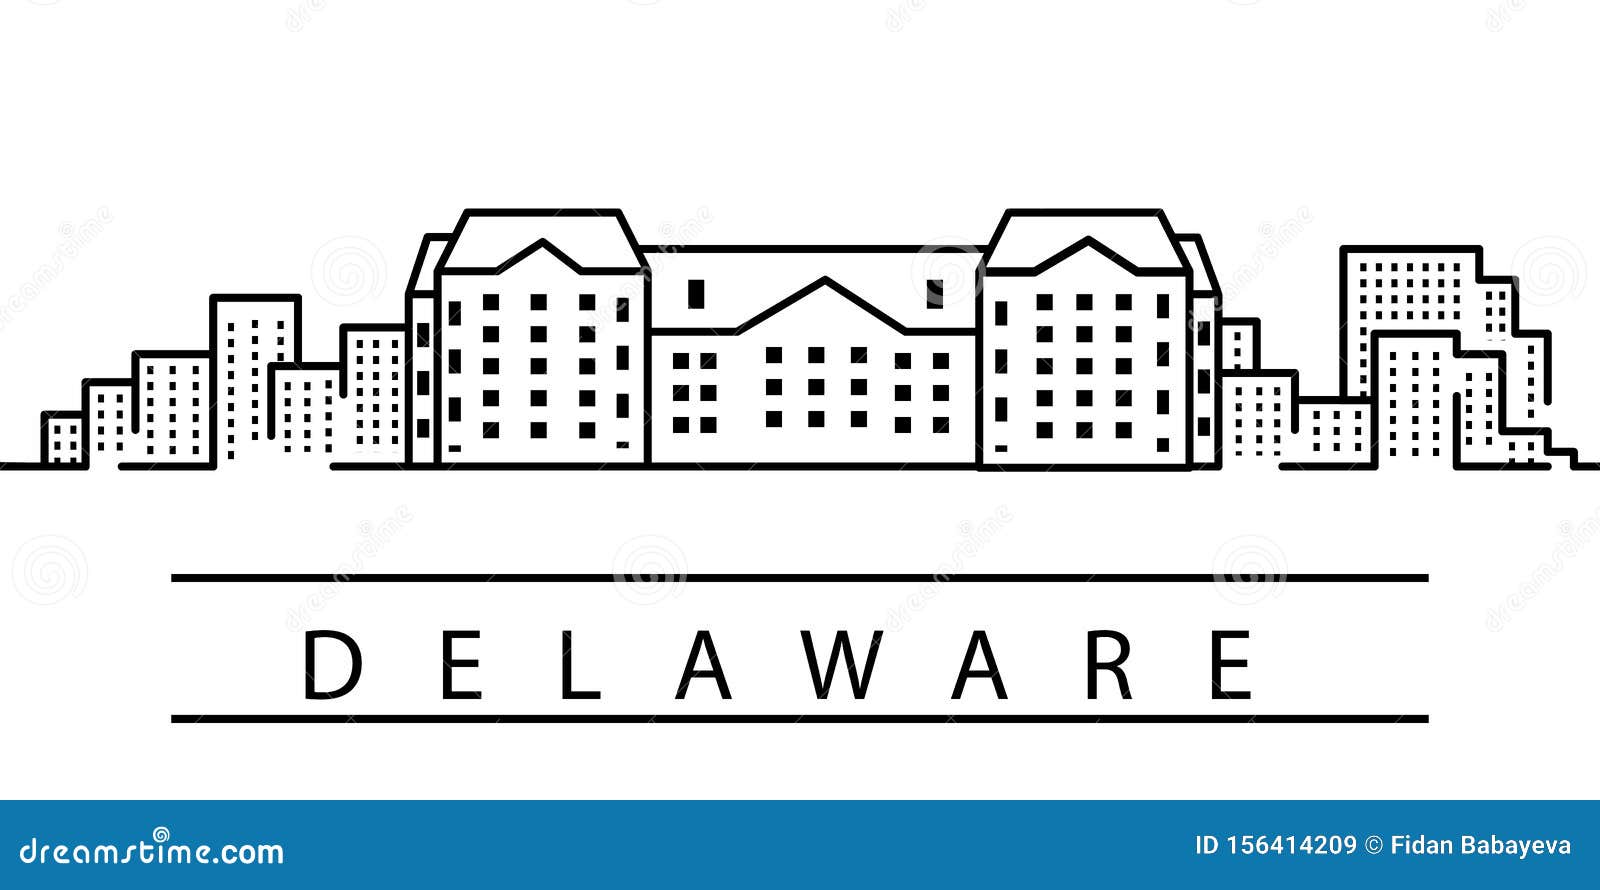 Delaware City Line Icon Element Of Usa States Illustration Icons Stock